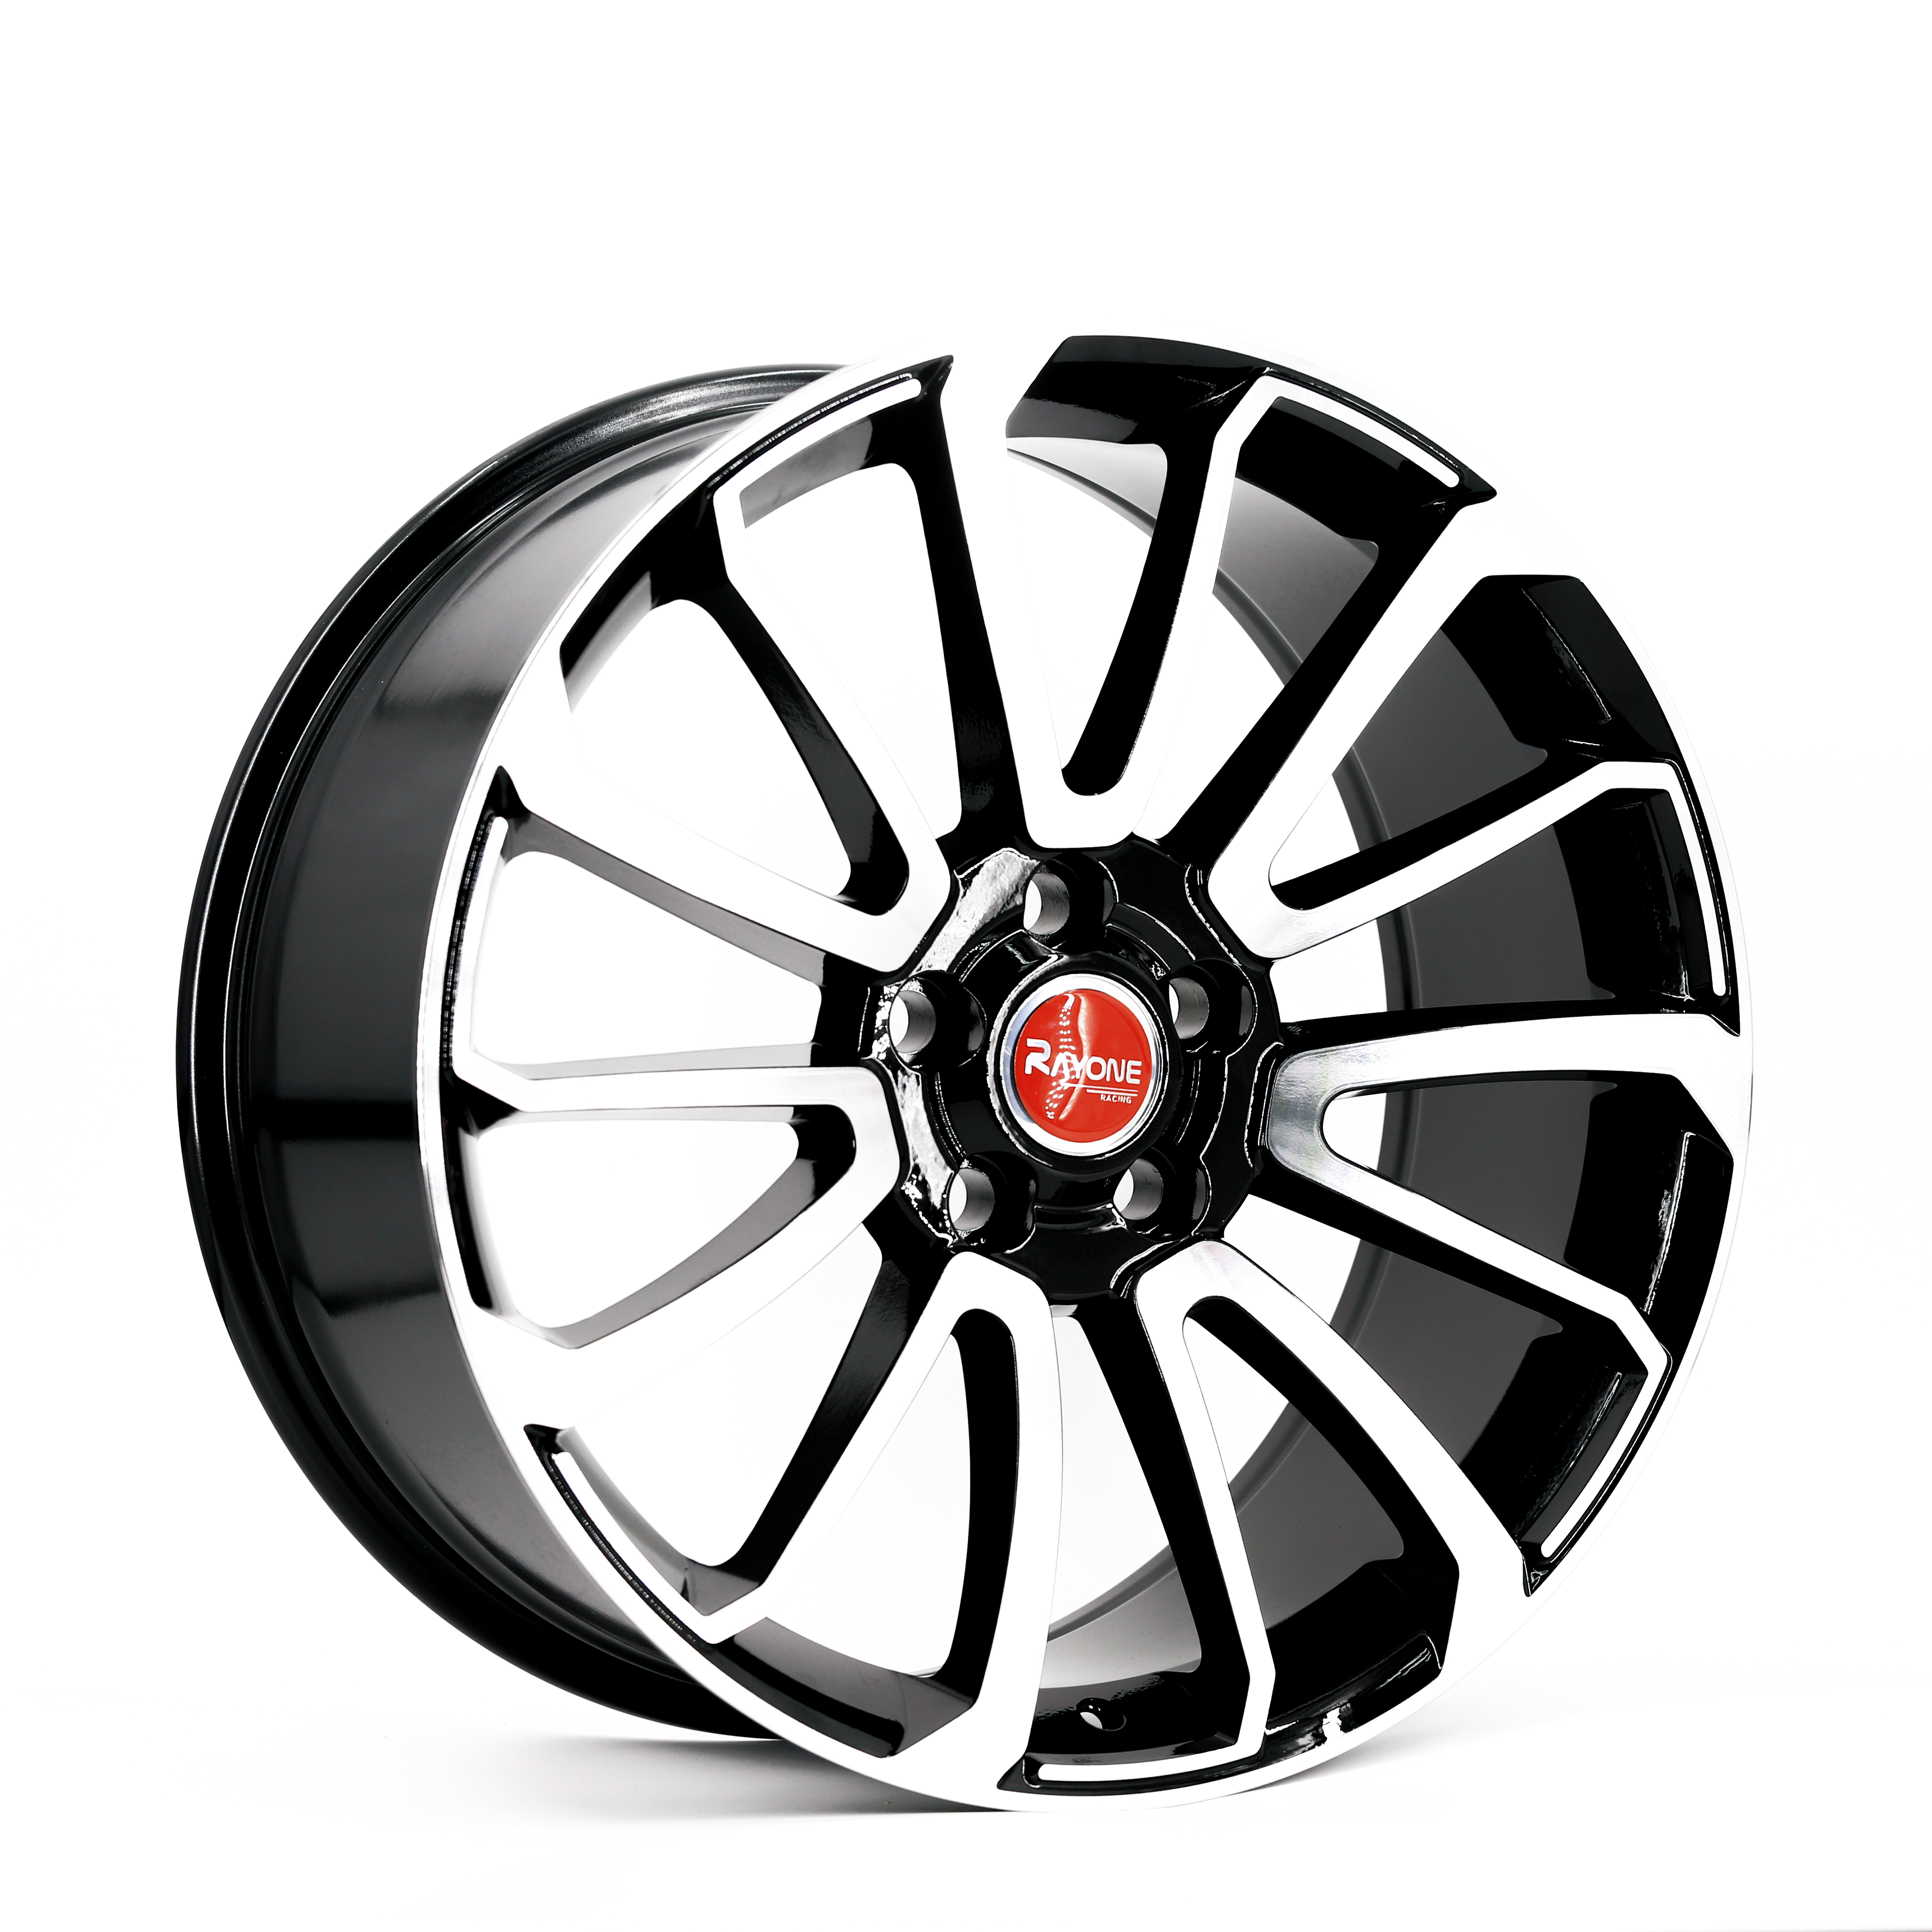 China Factory Wholesale 20Inch Casting Alloy Wheel Rims For Ranger Rover Featured Image